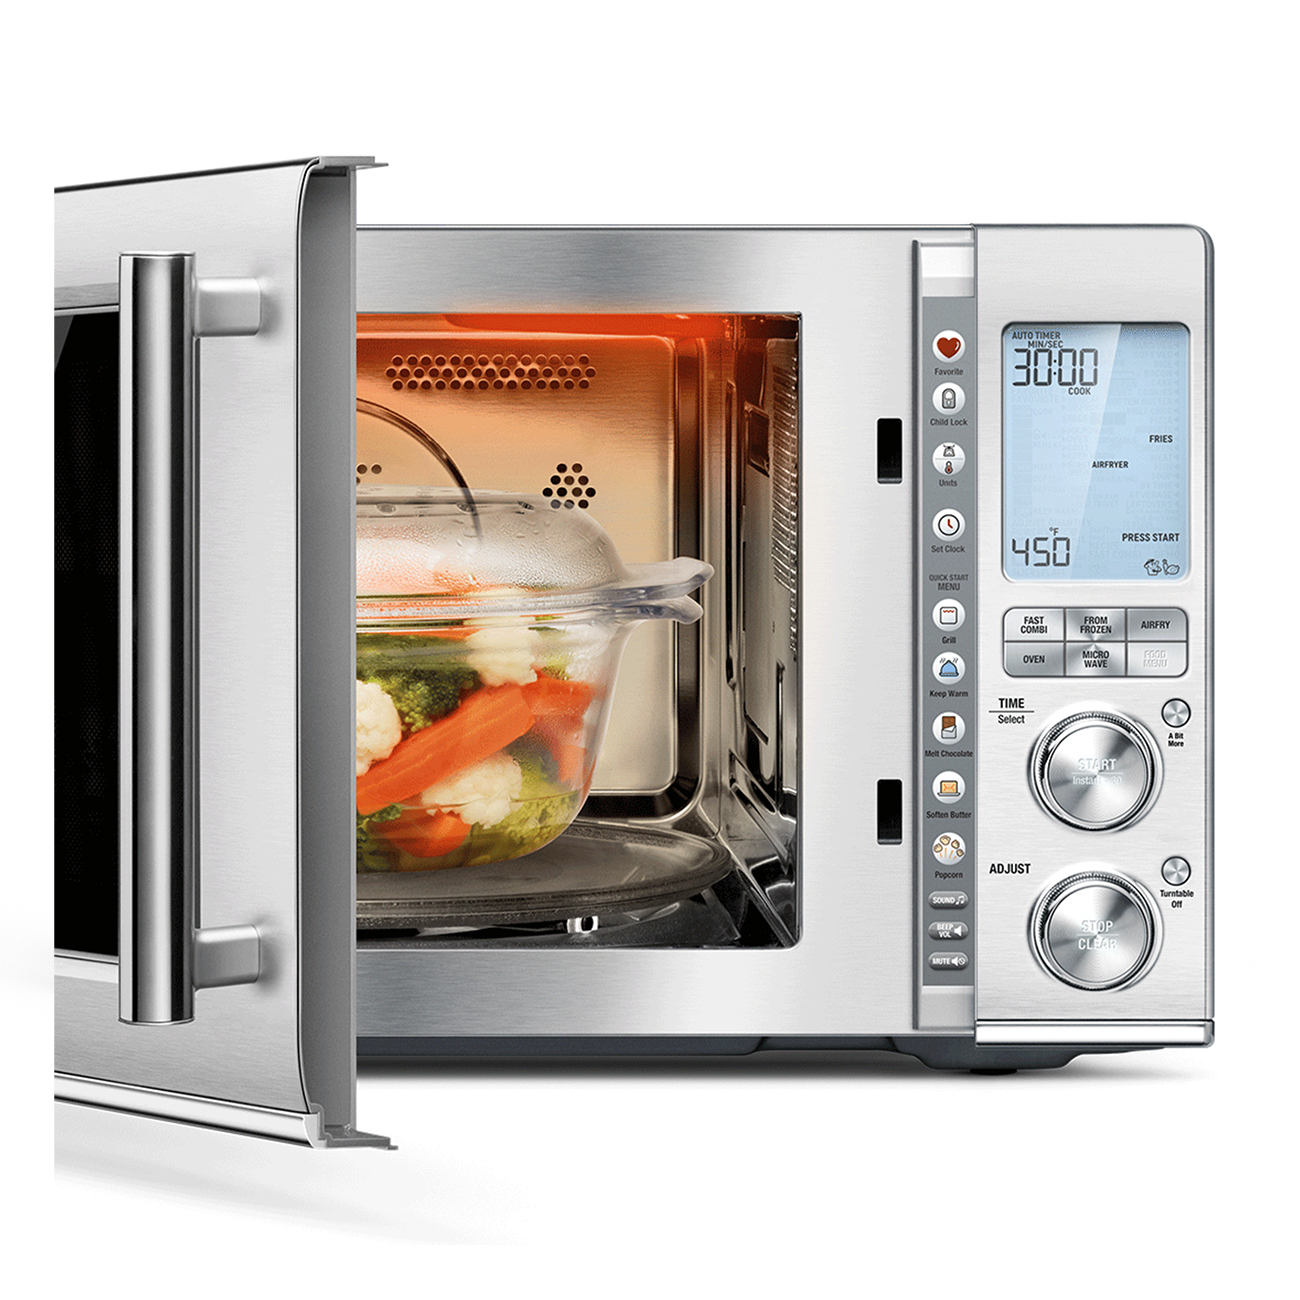 https://www.breville.com/content/dam/breville/us/assets/microwaves/finished-goods/bmo870-the-combi-wave-3-in-1/bmo870bss1buc1/images/BMO870_Carousel3.jpeg